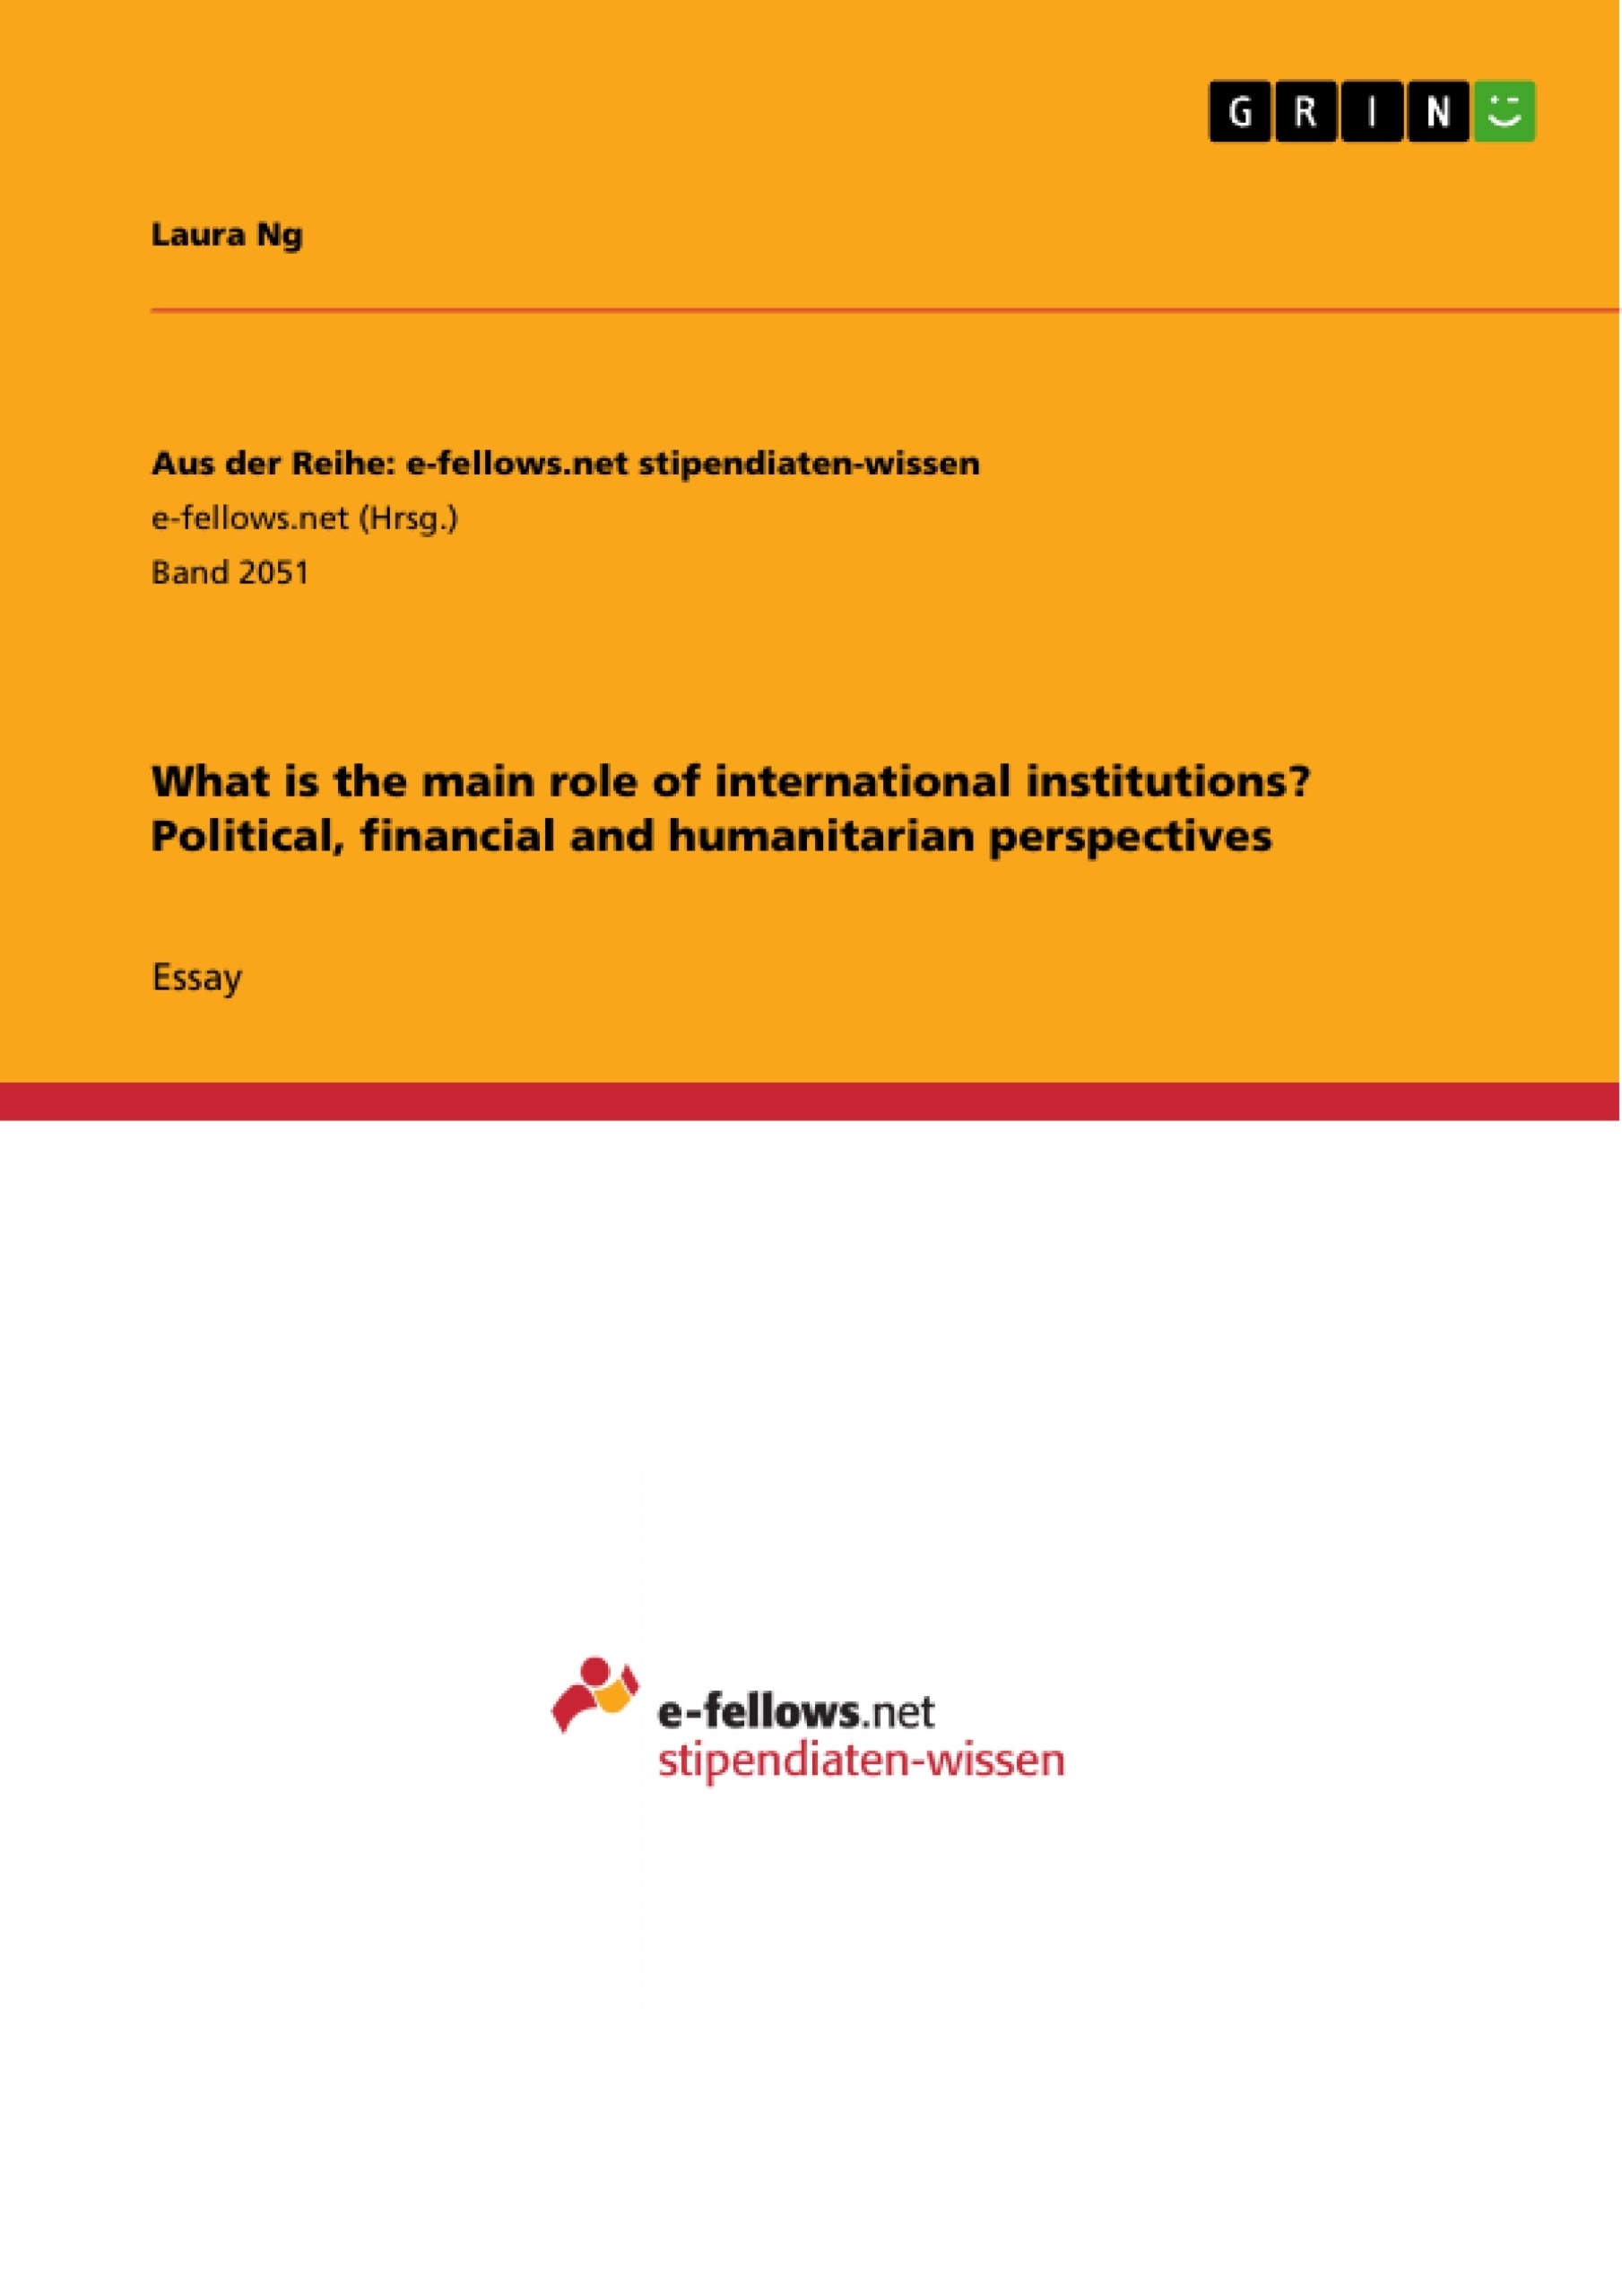 Title: What is the main role of international institutions? Political, financial and humanitarian perspectives